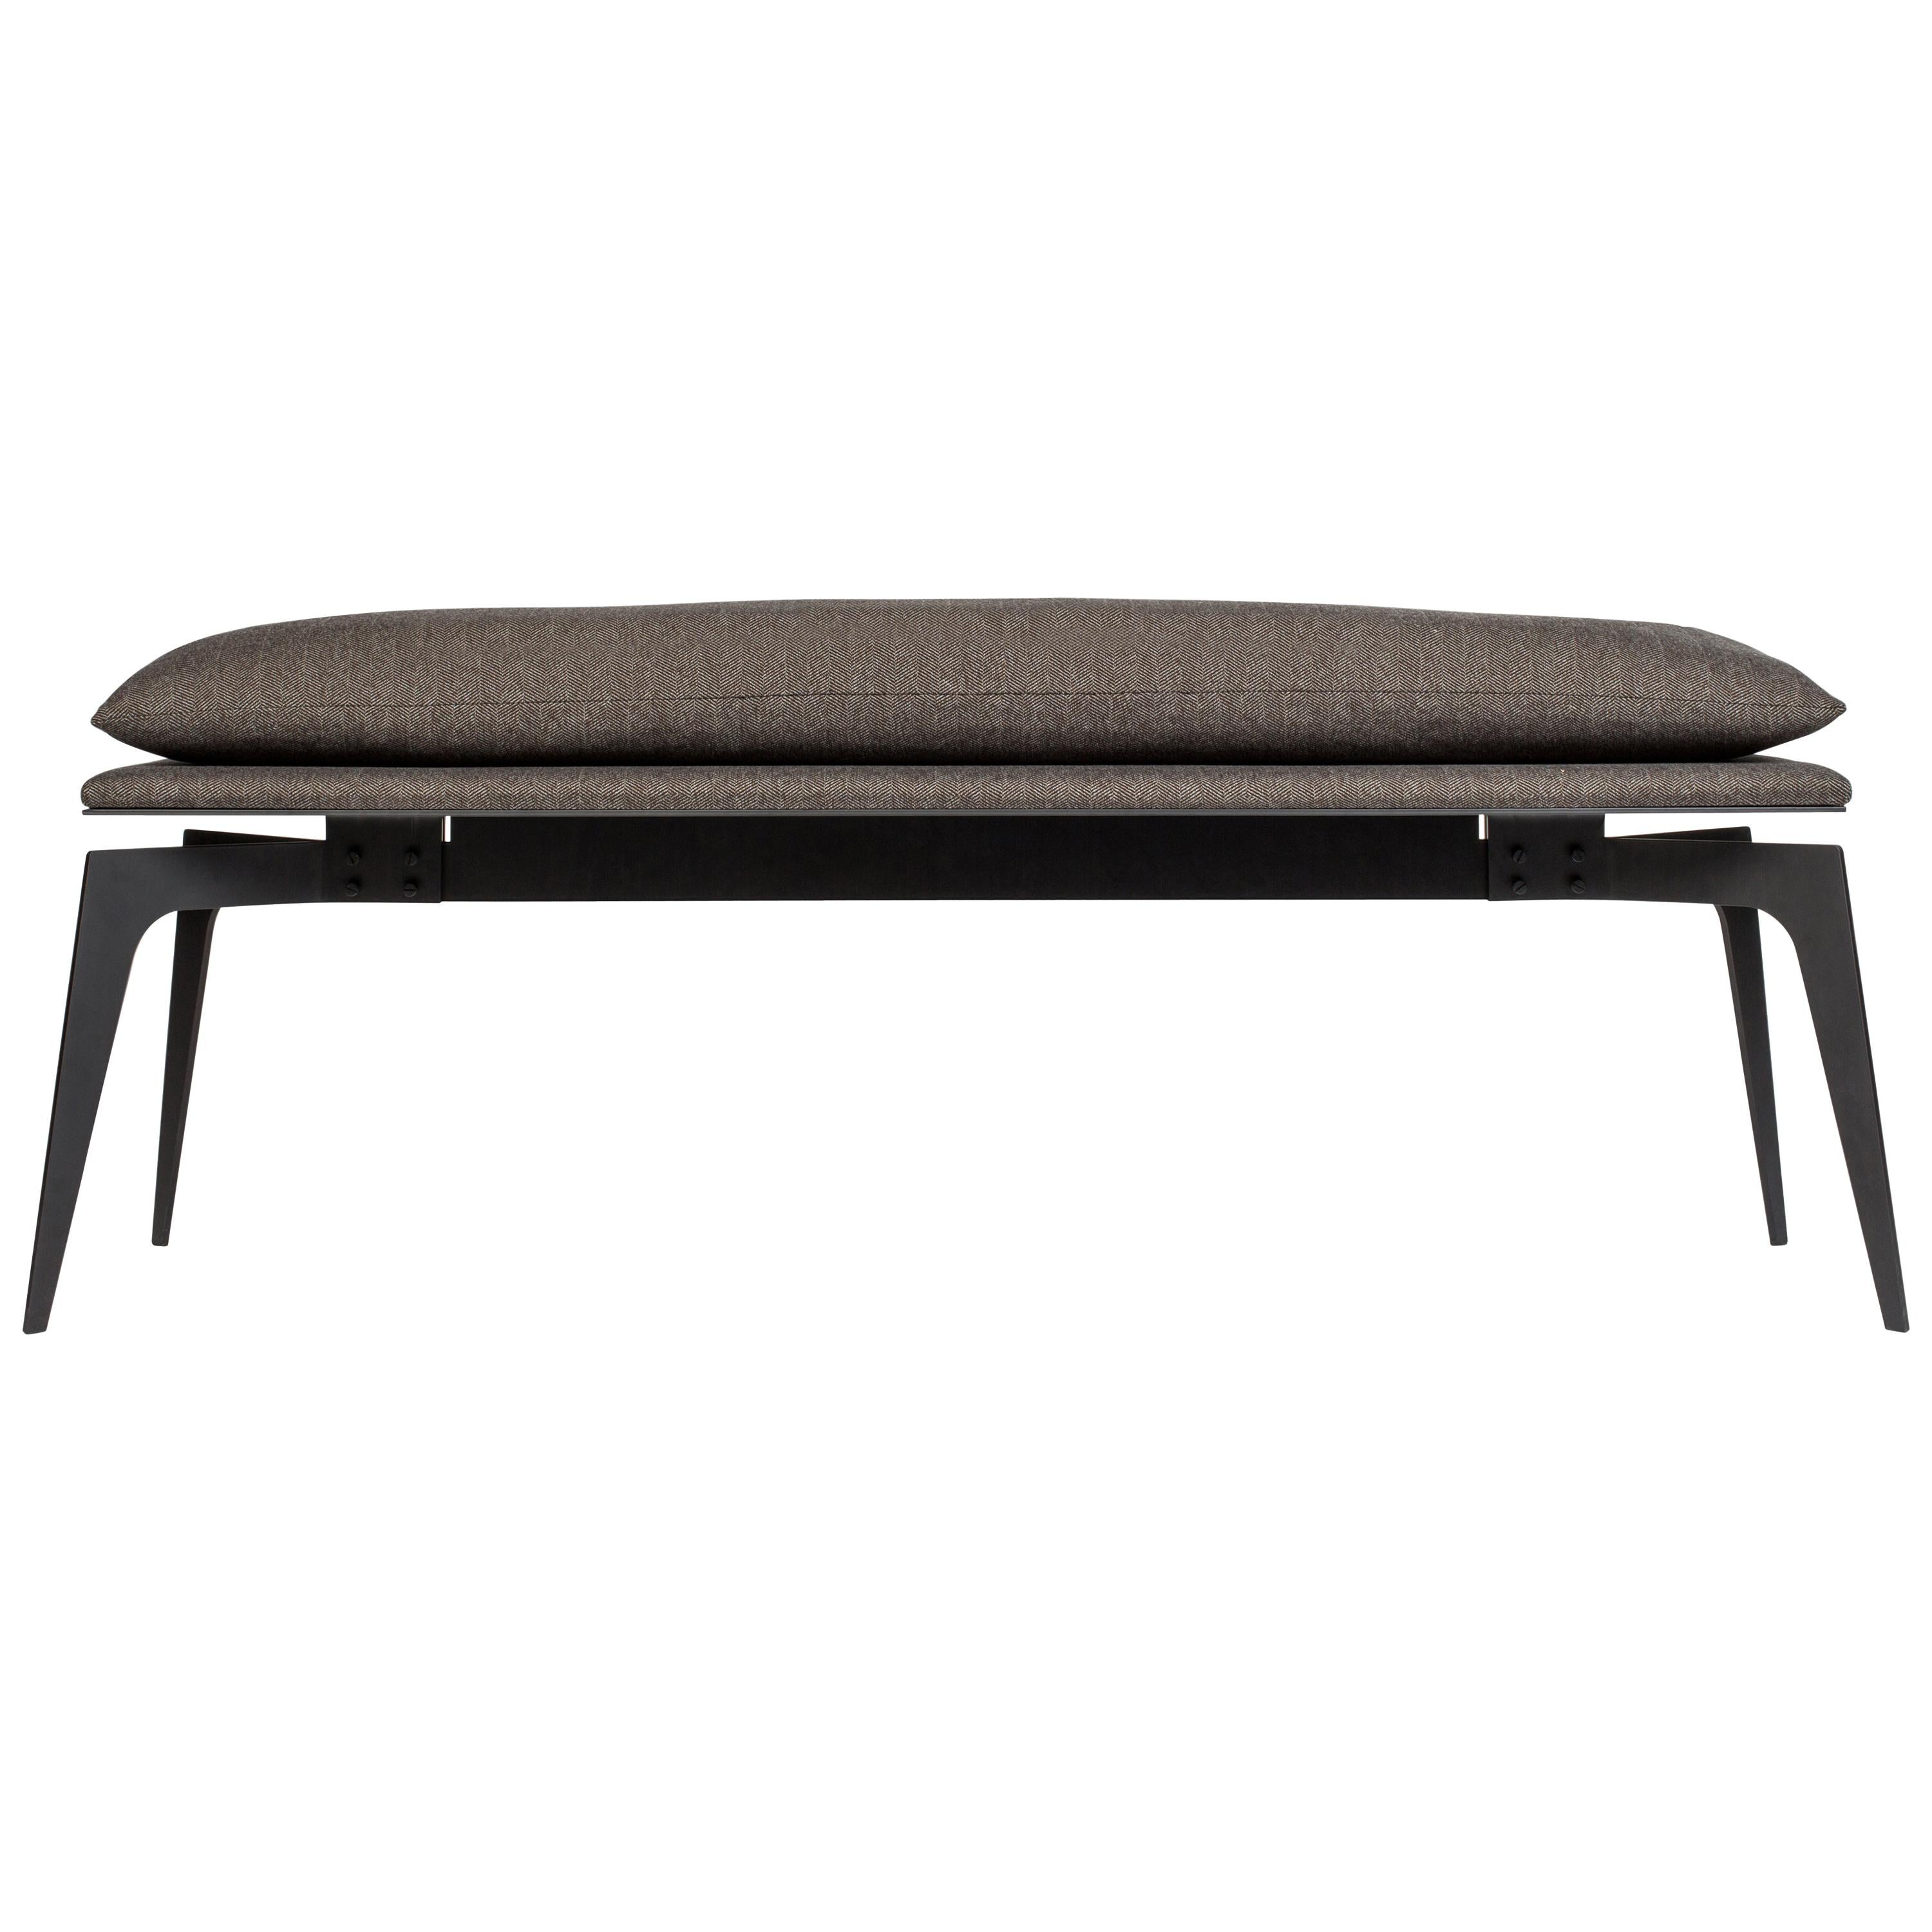 Gray (Charcoal-Gray Herringbone) Long Prong Bench in Blackened Steel Base with Upholstery by Gabriel Scott